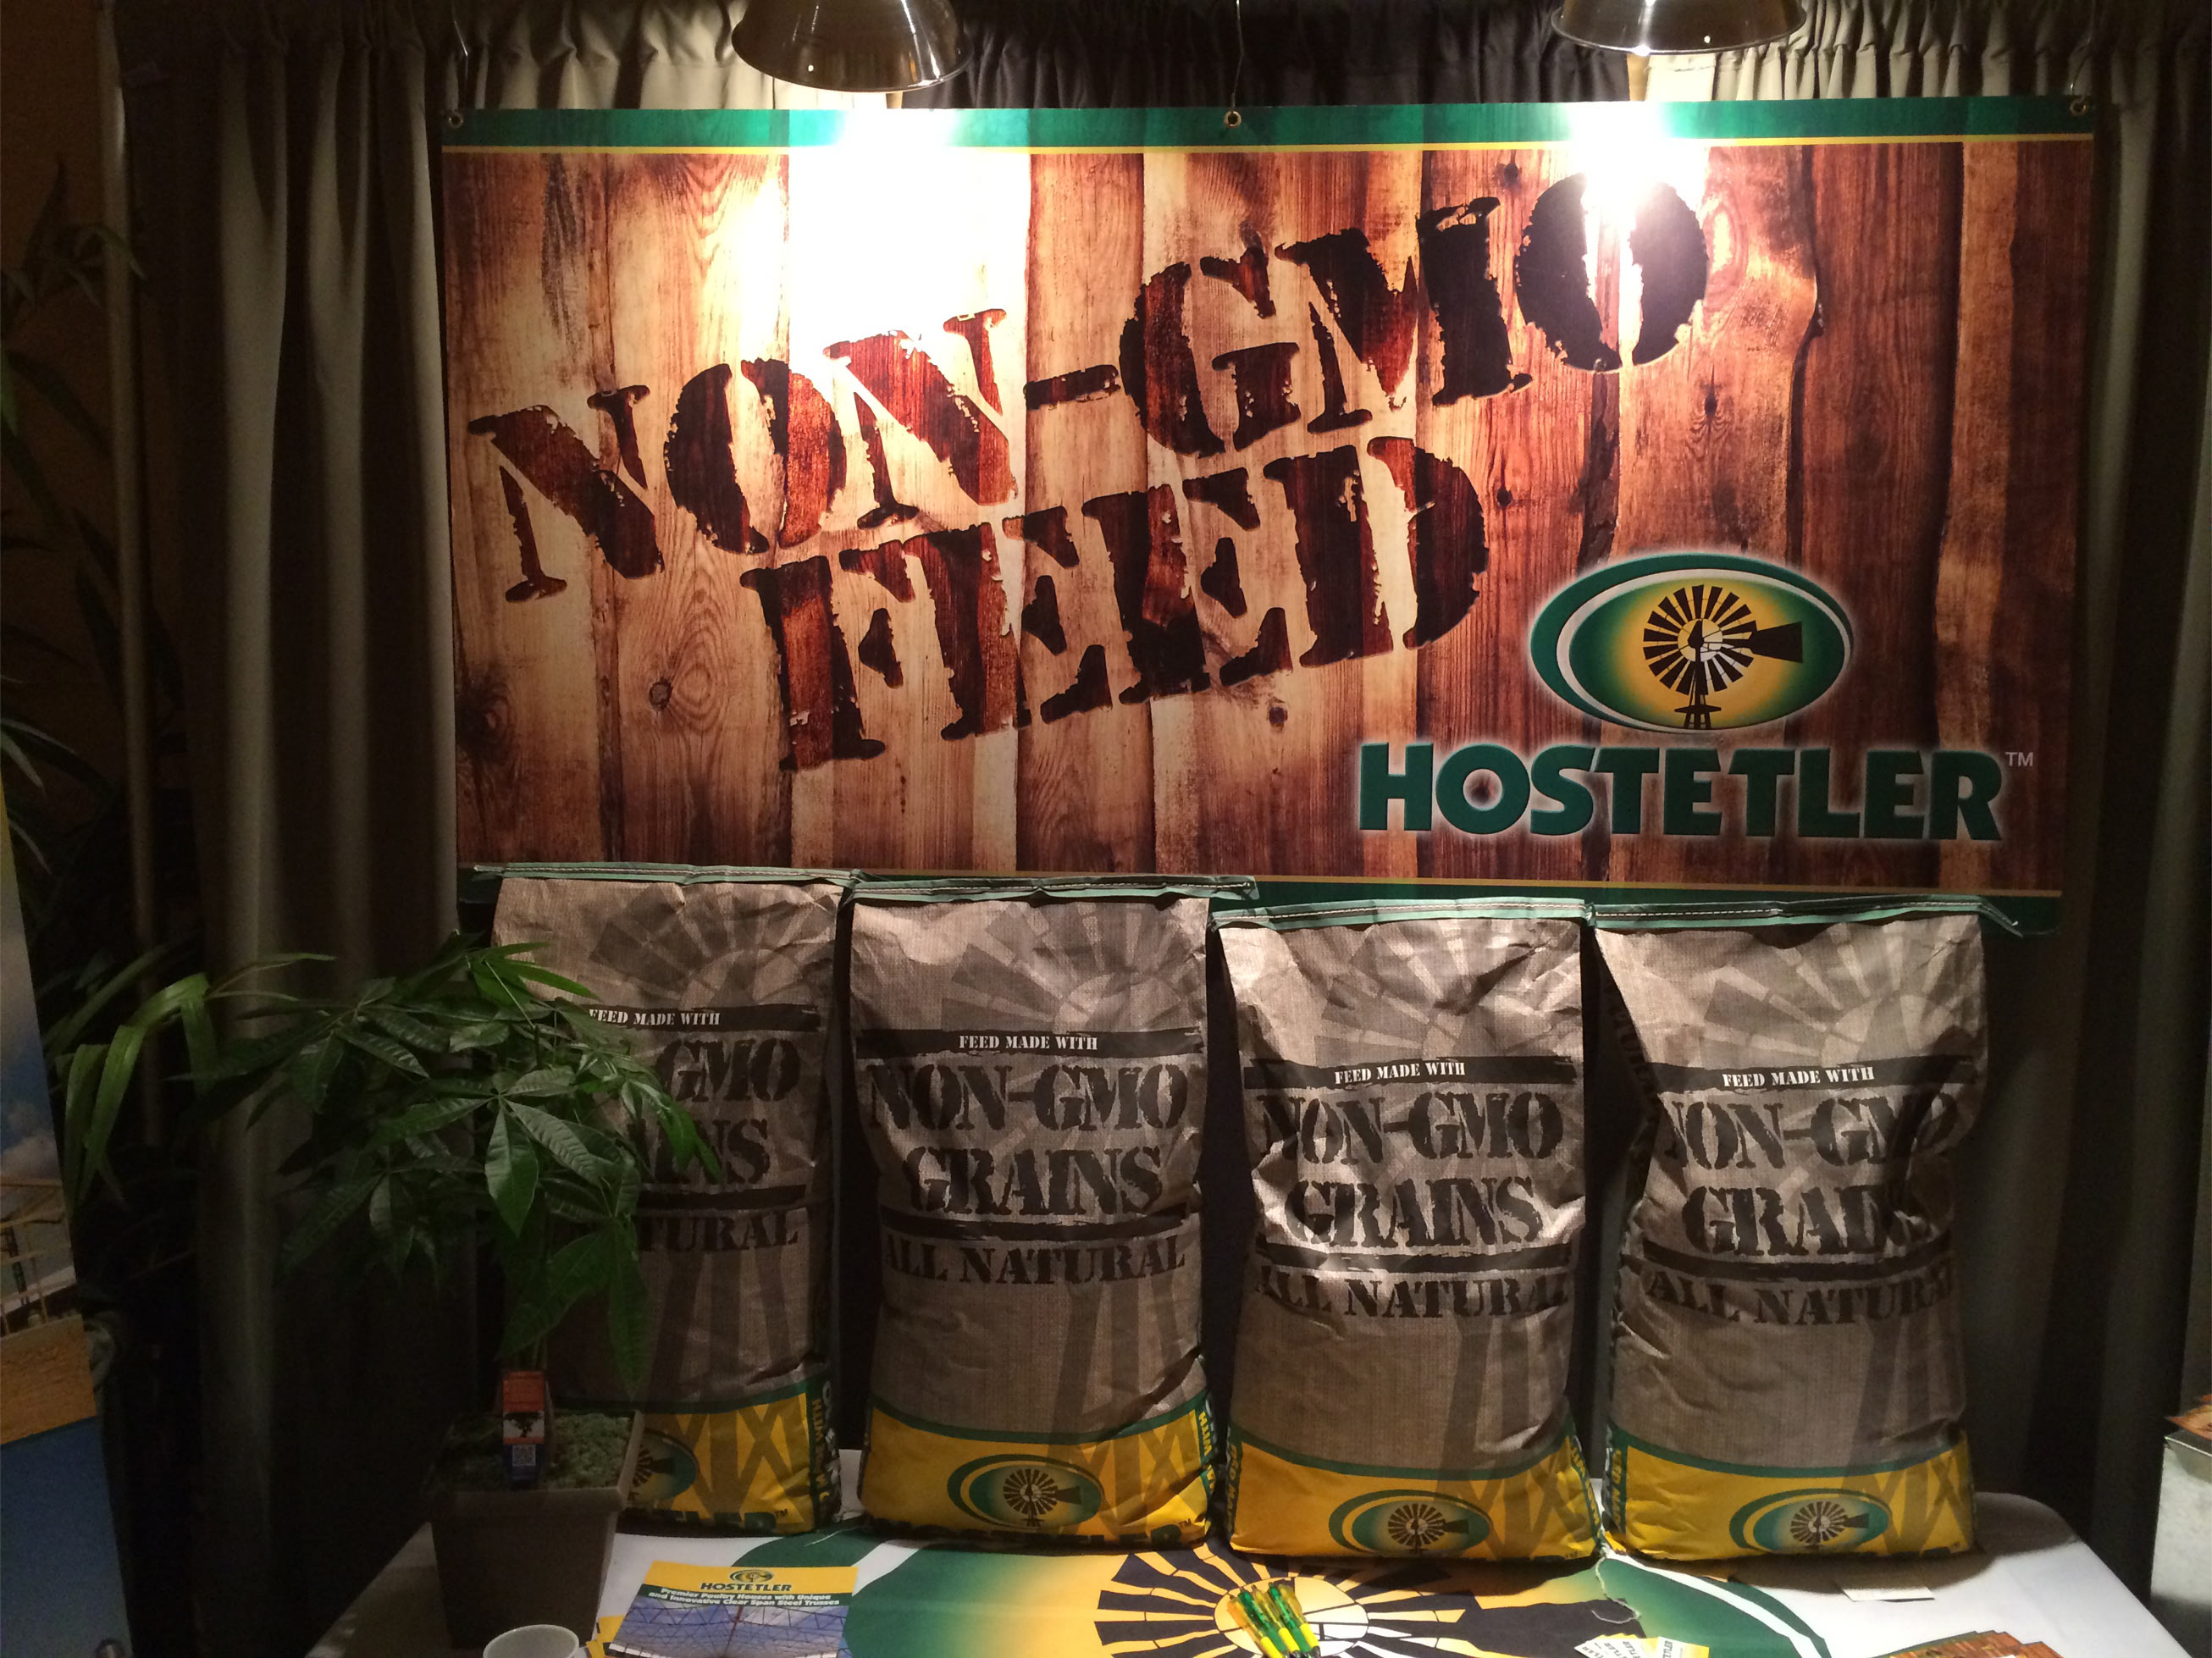 Non-gmo feed display with product bags